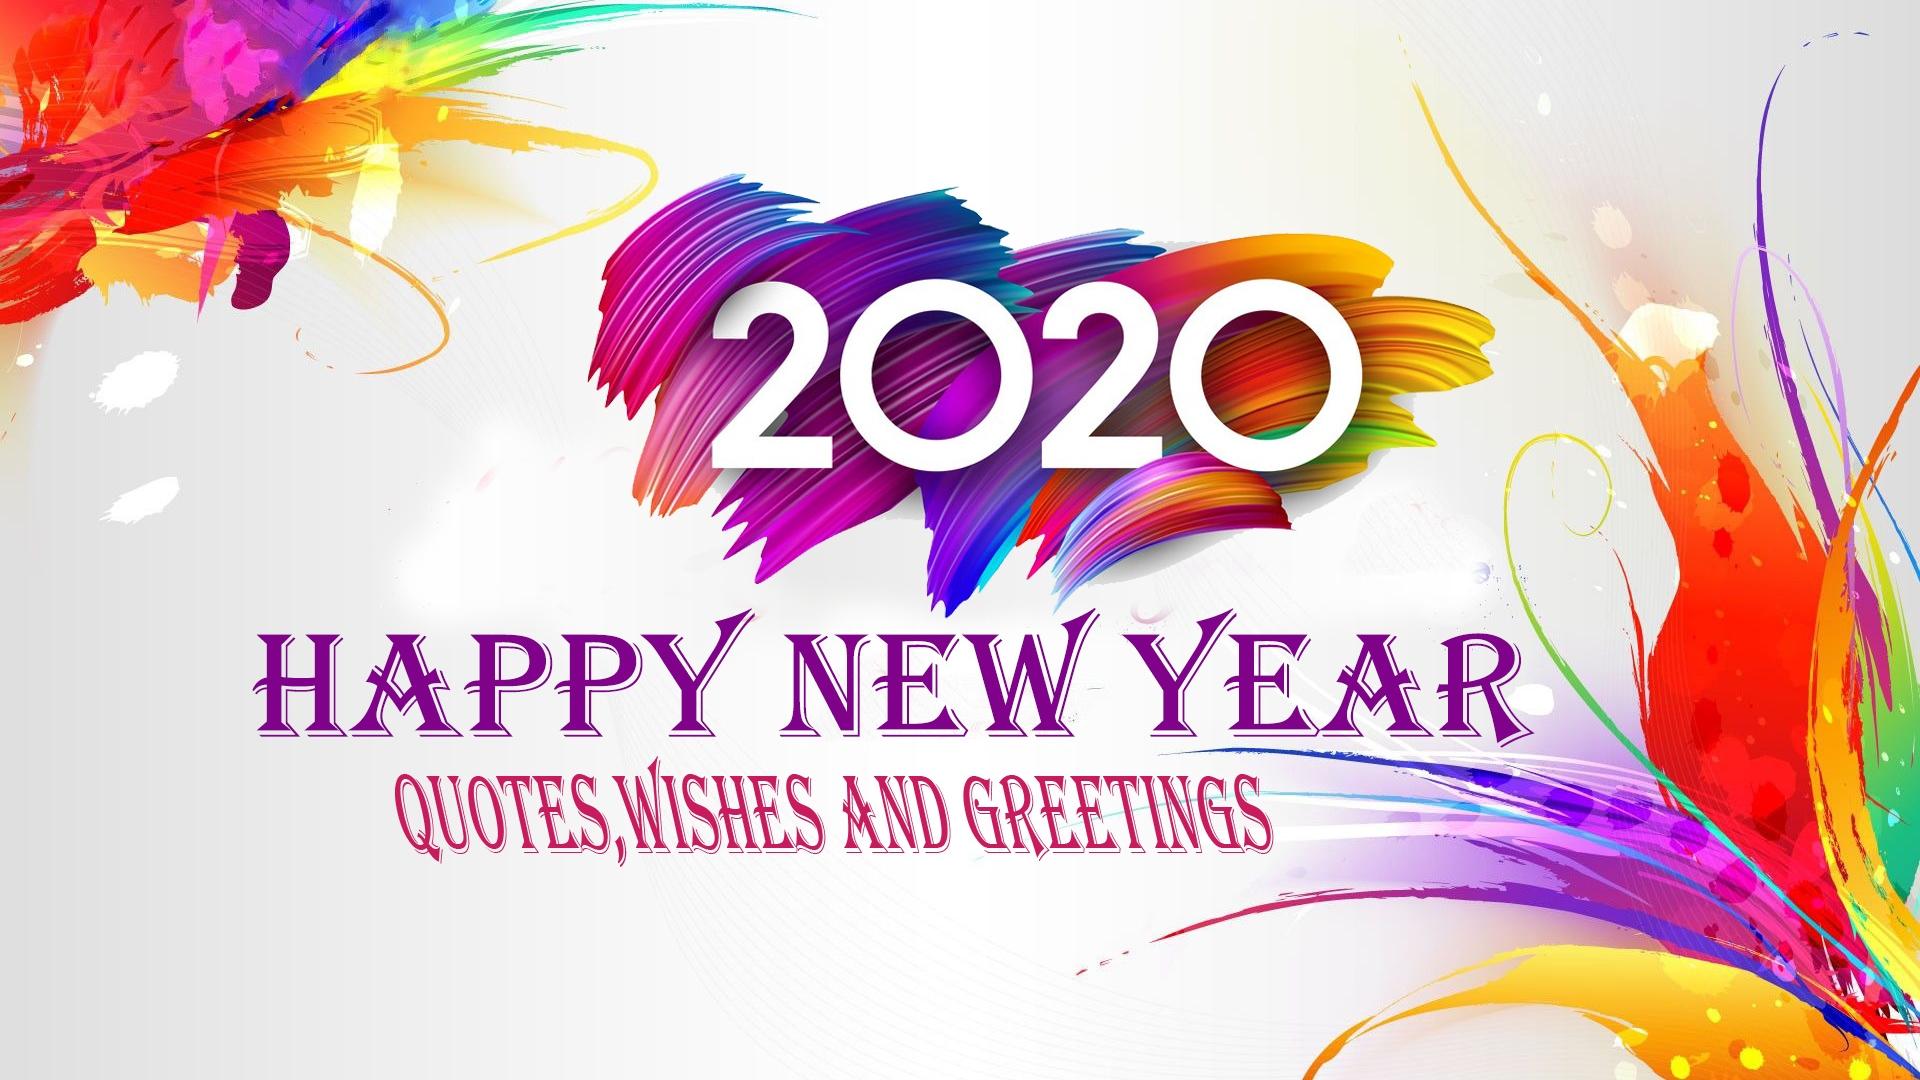 Free download Happy New Year 2020 Quotes Image Wishes